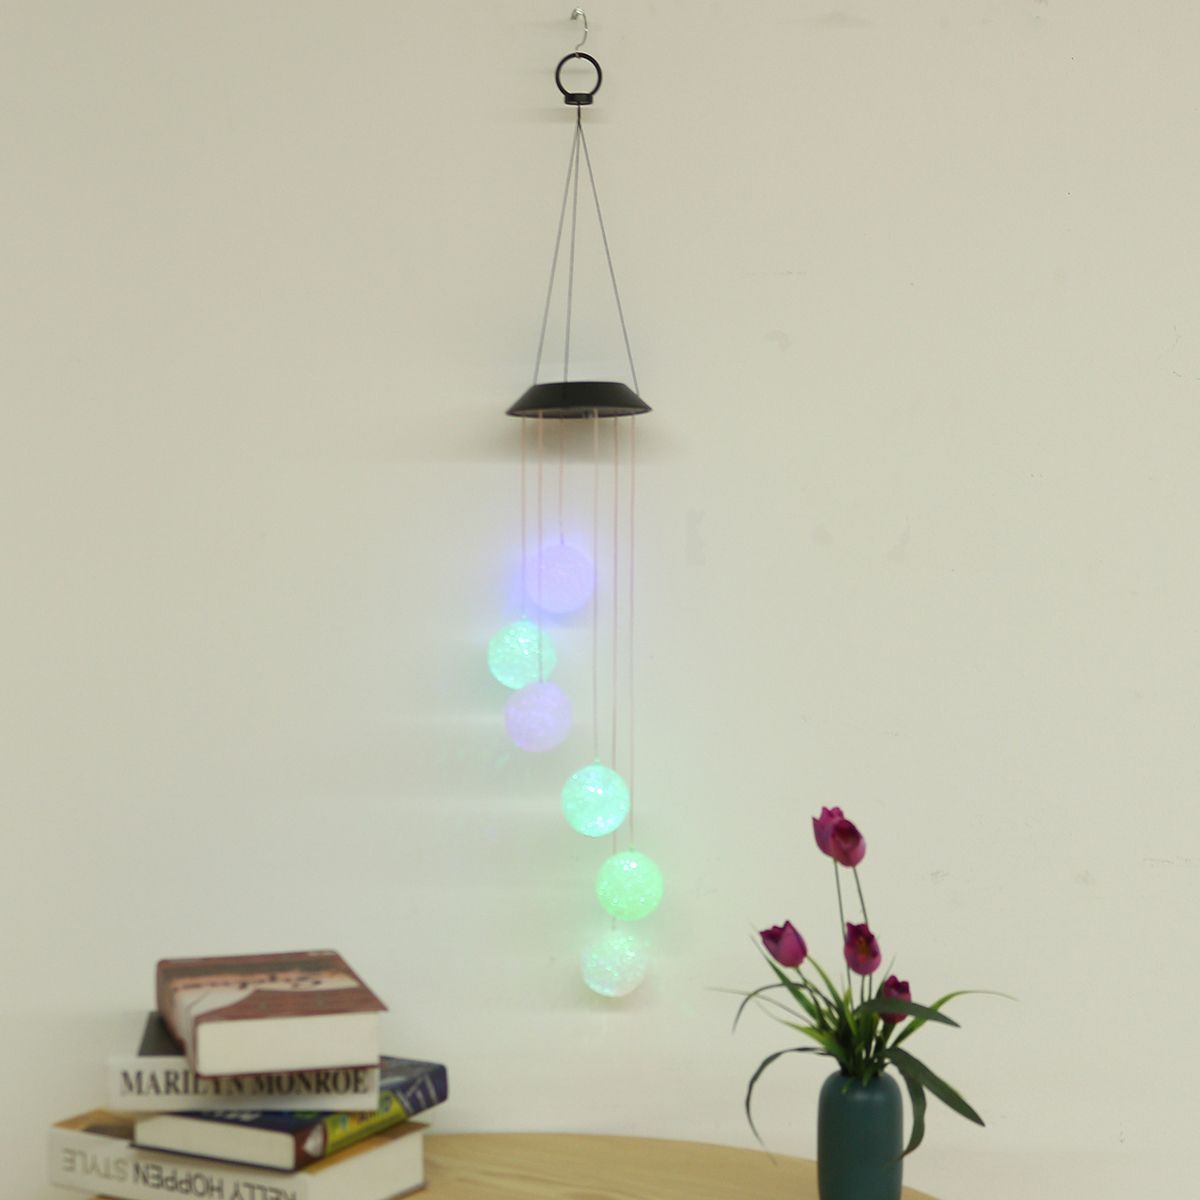 Aeolian-Hanging-Wind-Solar-LED-Lights-Chimes-Powered-String-Lawn-Garden-Lamp-1642749